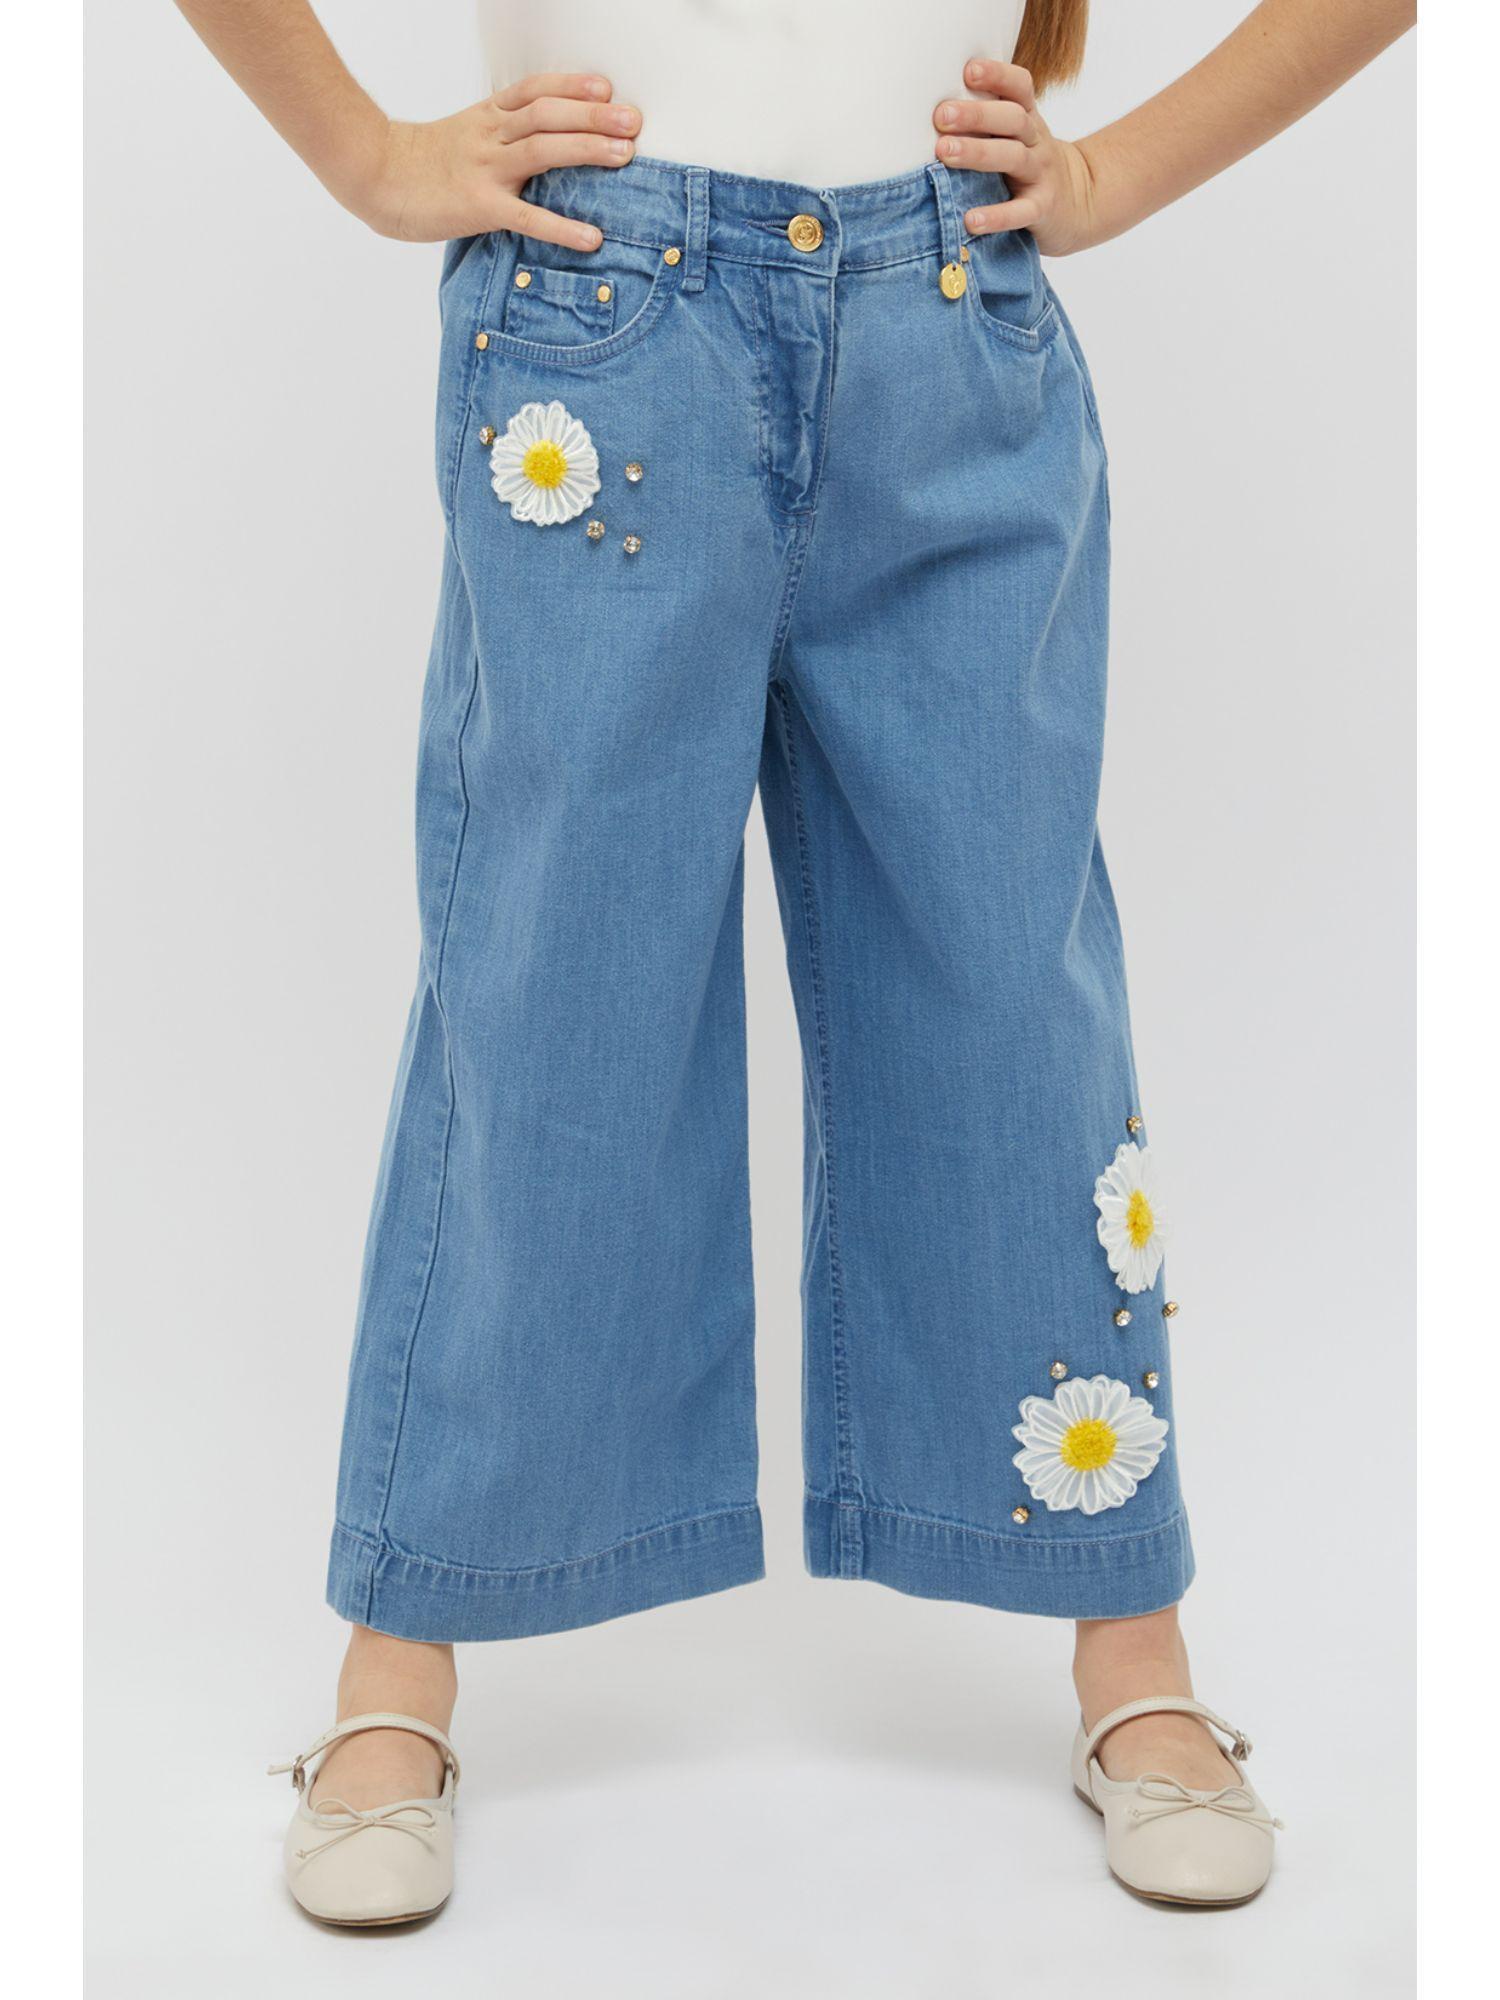 blue embroidered jeans